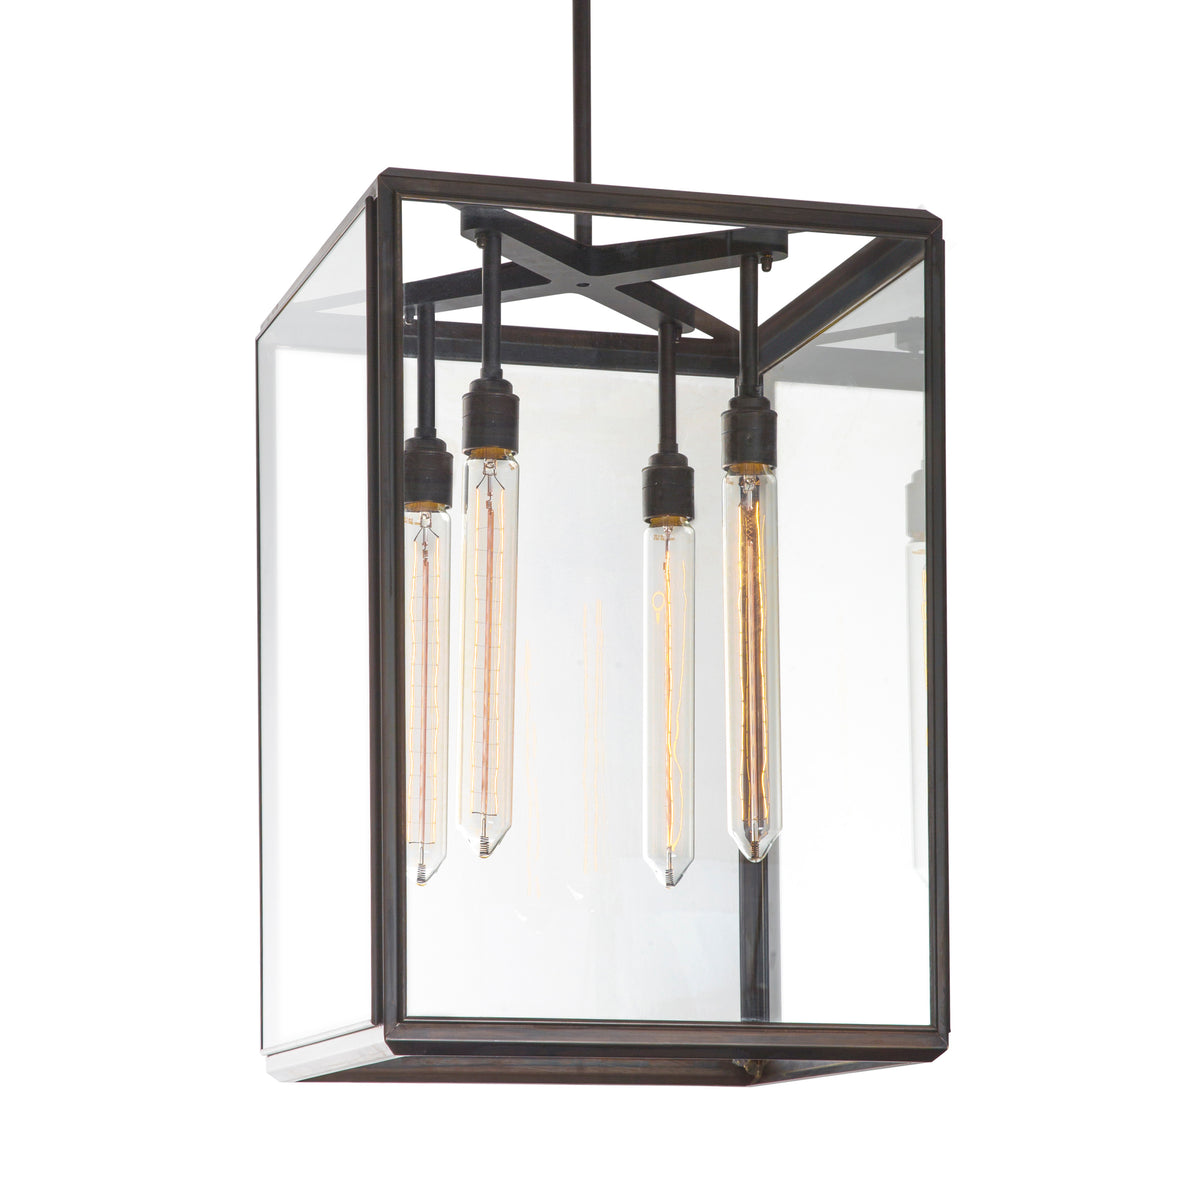 Hazel Large Lantern Pendant Light with drop rod in bronze with clear glass